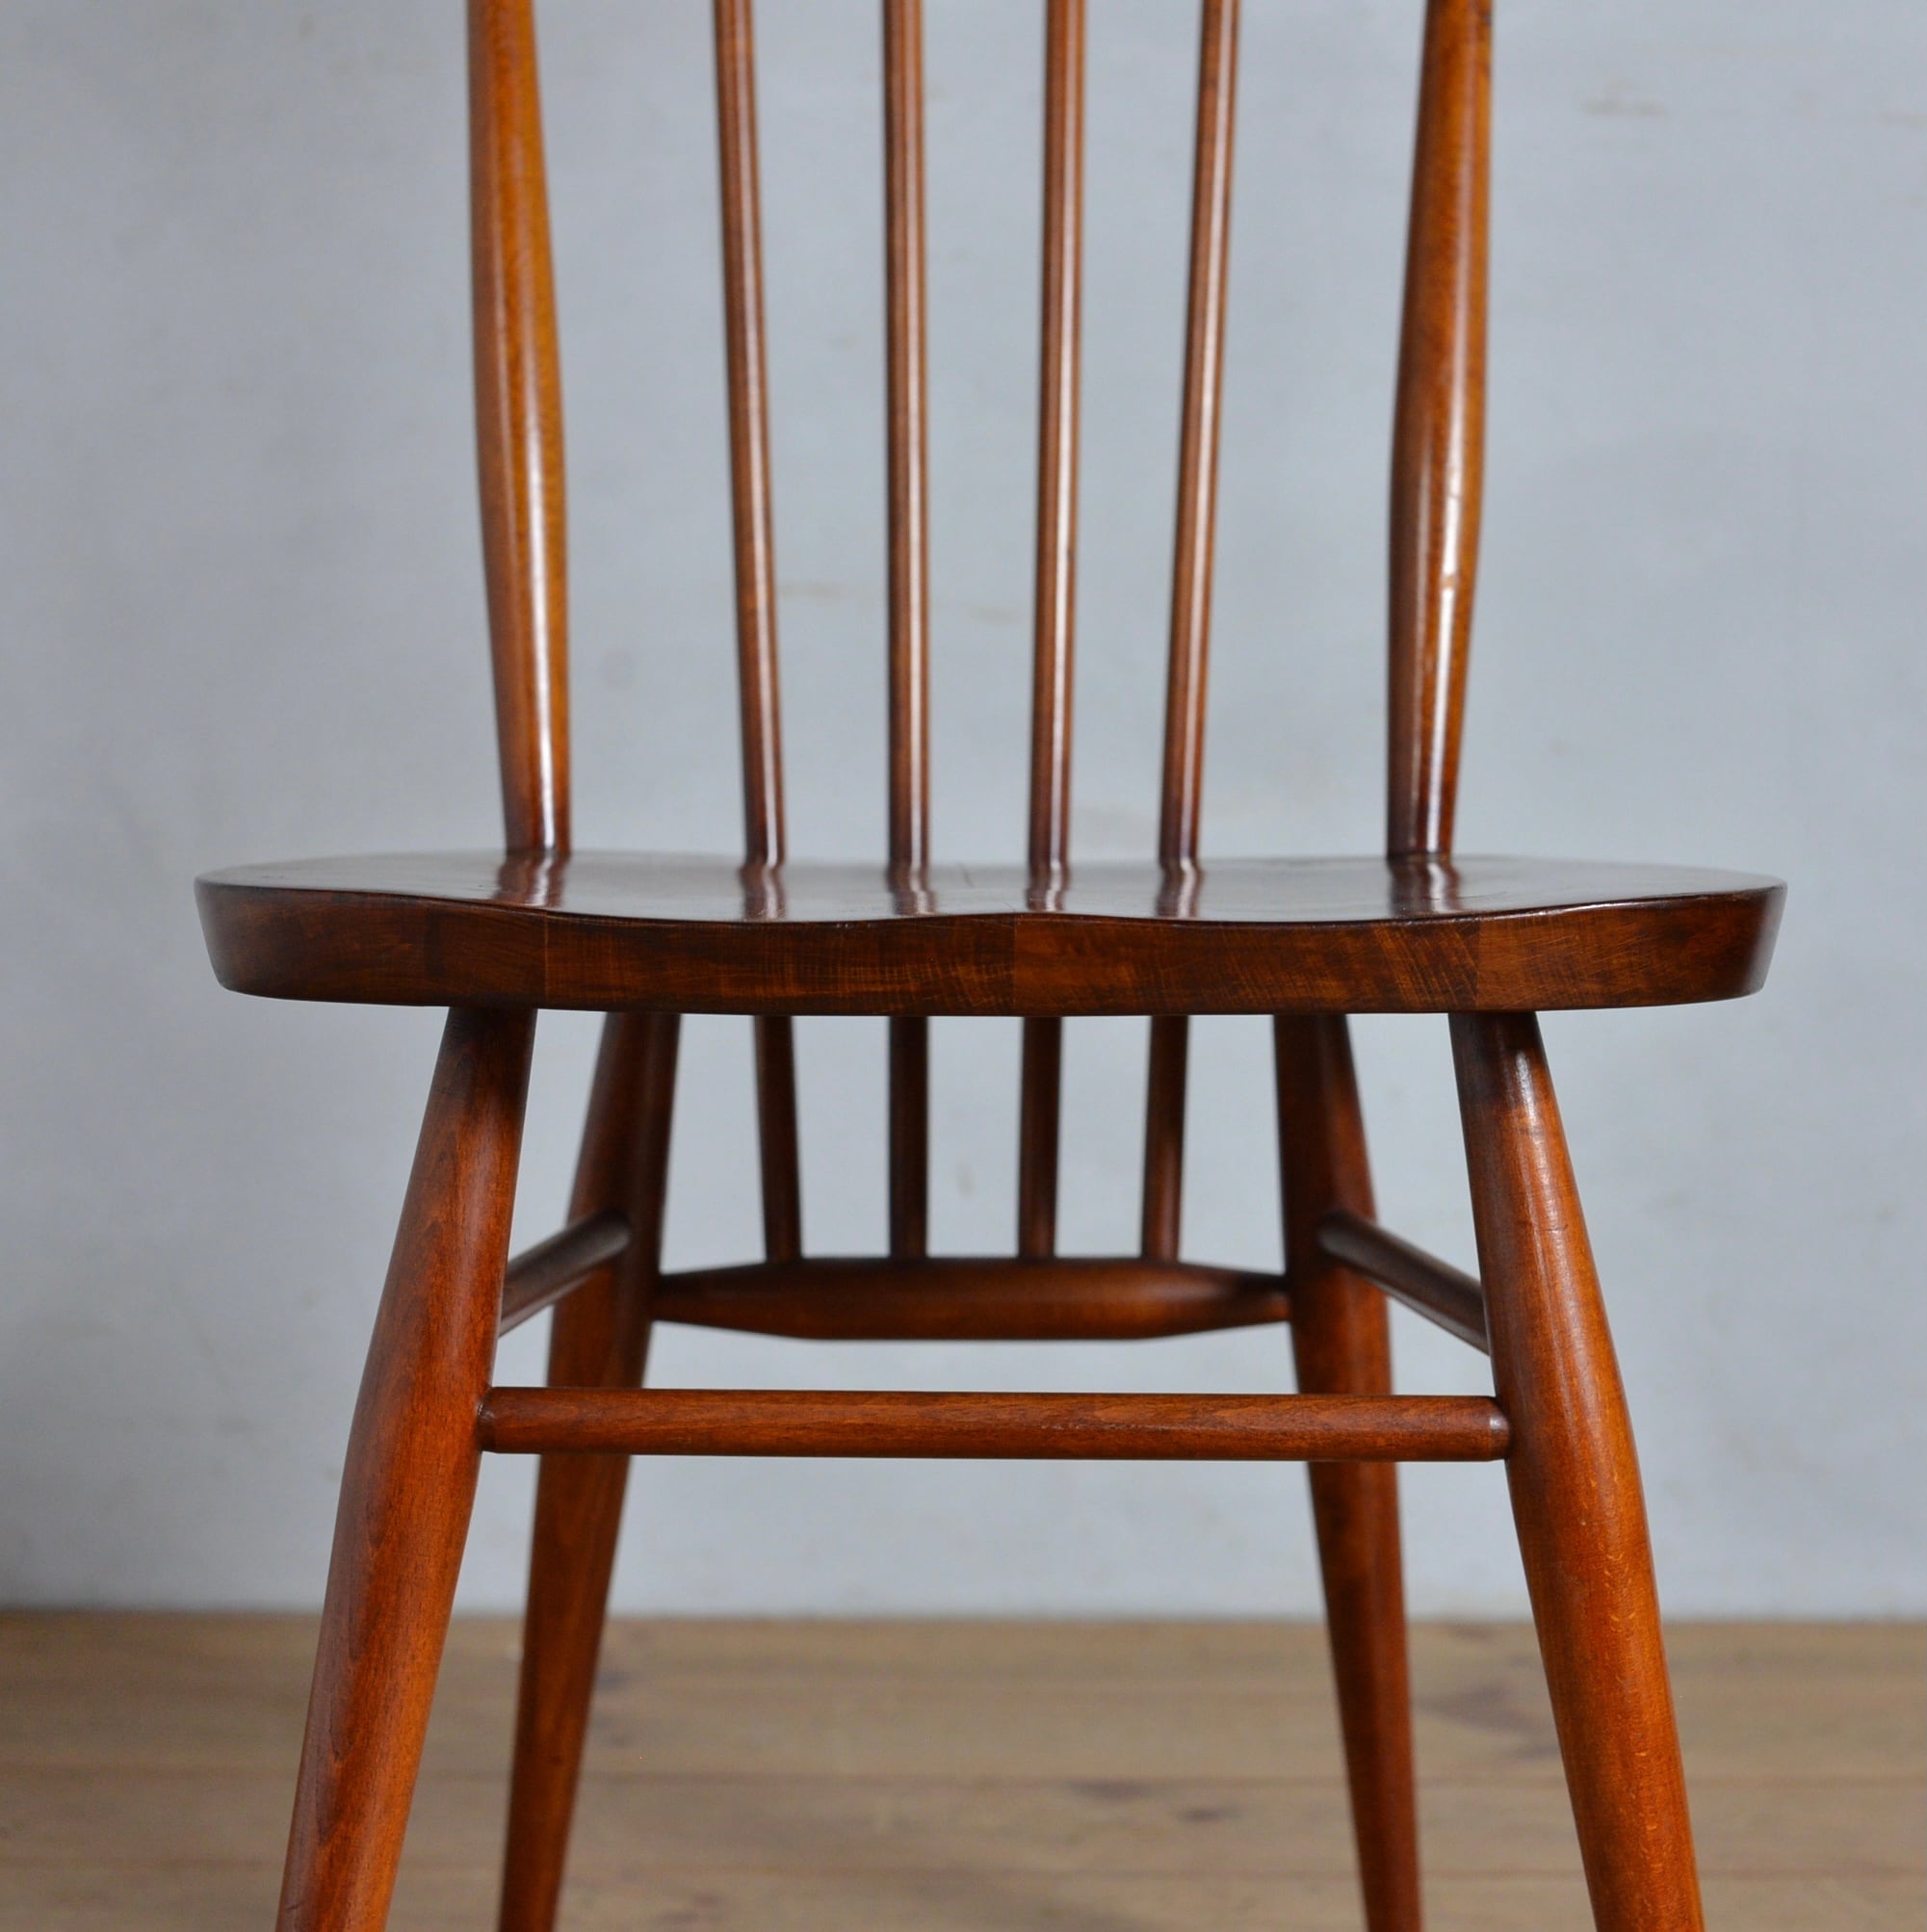 Ercol Stickback Chair / アーコール スティックバック チェア　【A】〈ダイニングチェア〉112116 | SHABBY'S  MARKETPLACE　アンティーク・ヴィンテージ 家具や雑貨のお店 powered by BASE